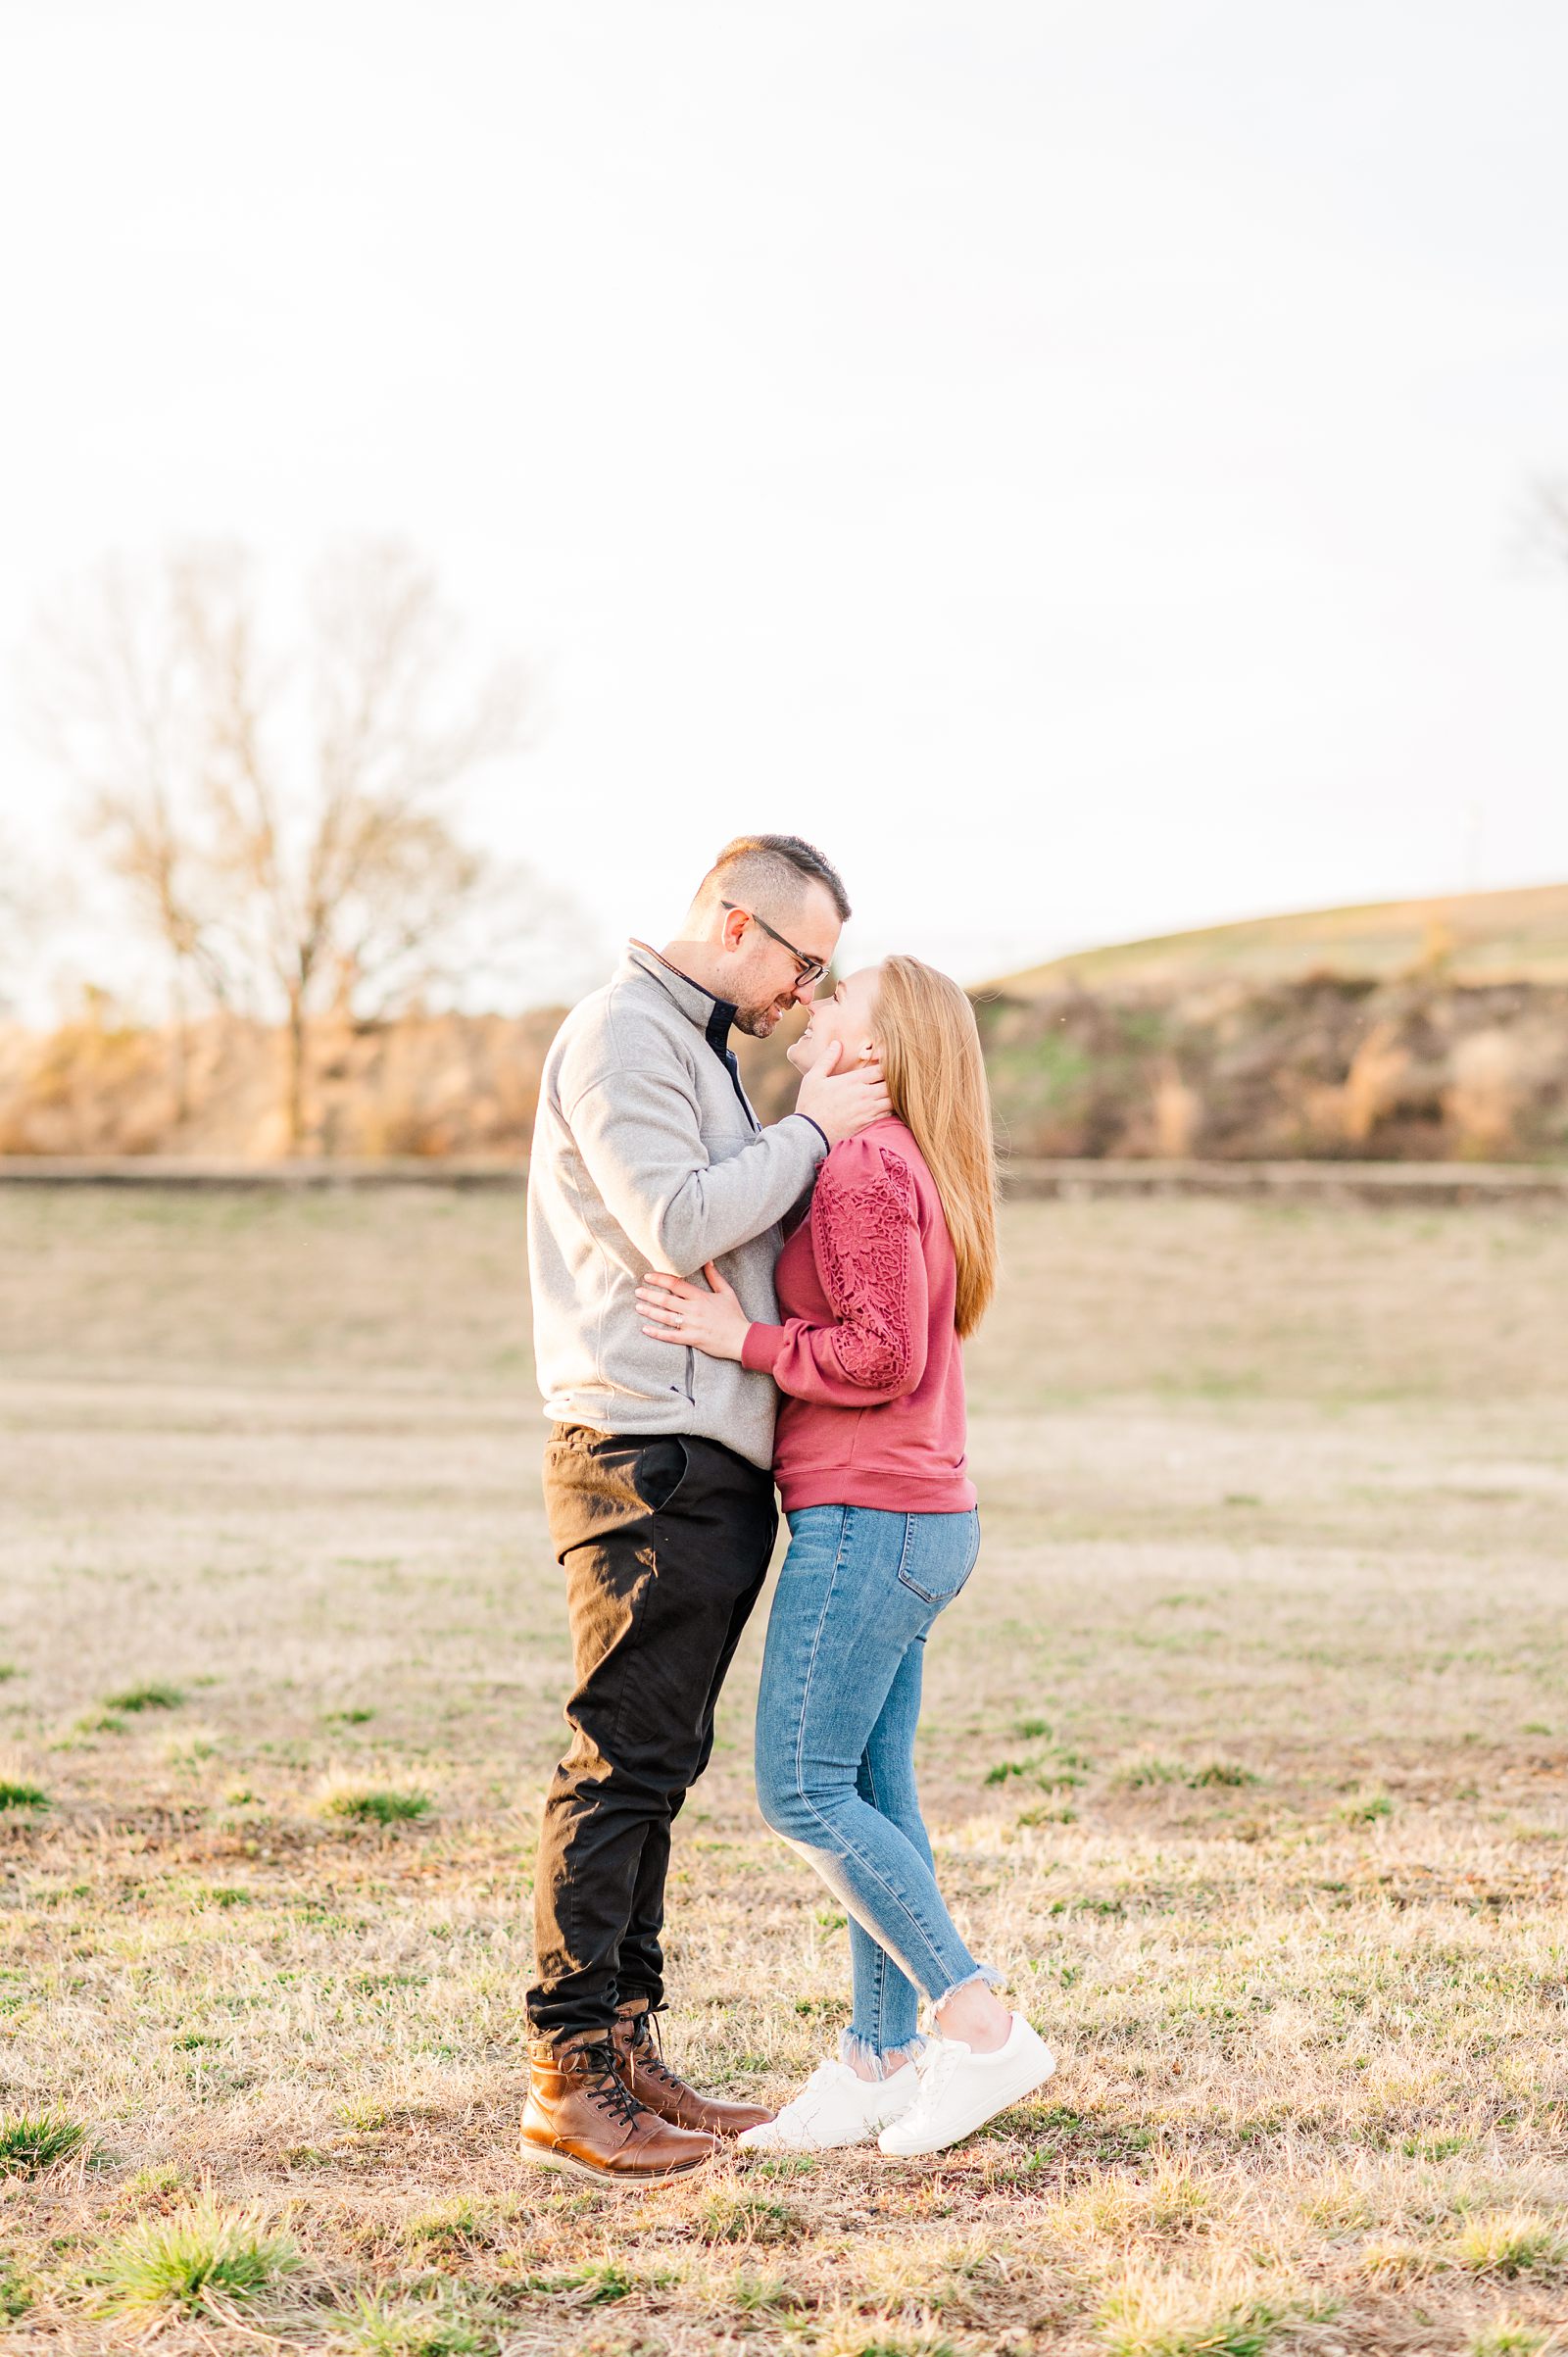 Downtown Richmond Engagement Session at Brown's Island. Wedding Photographer Kailey Brianne Photography